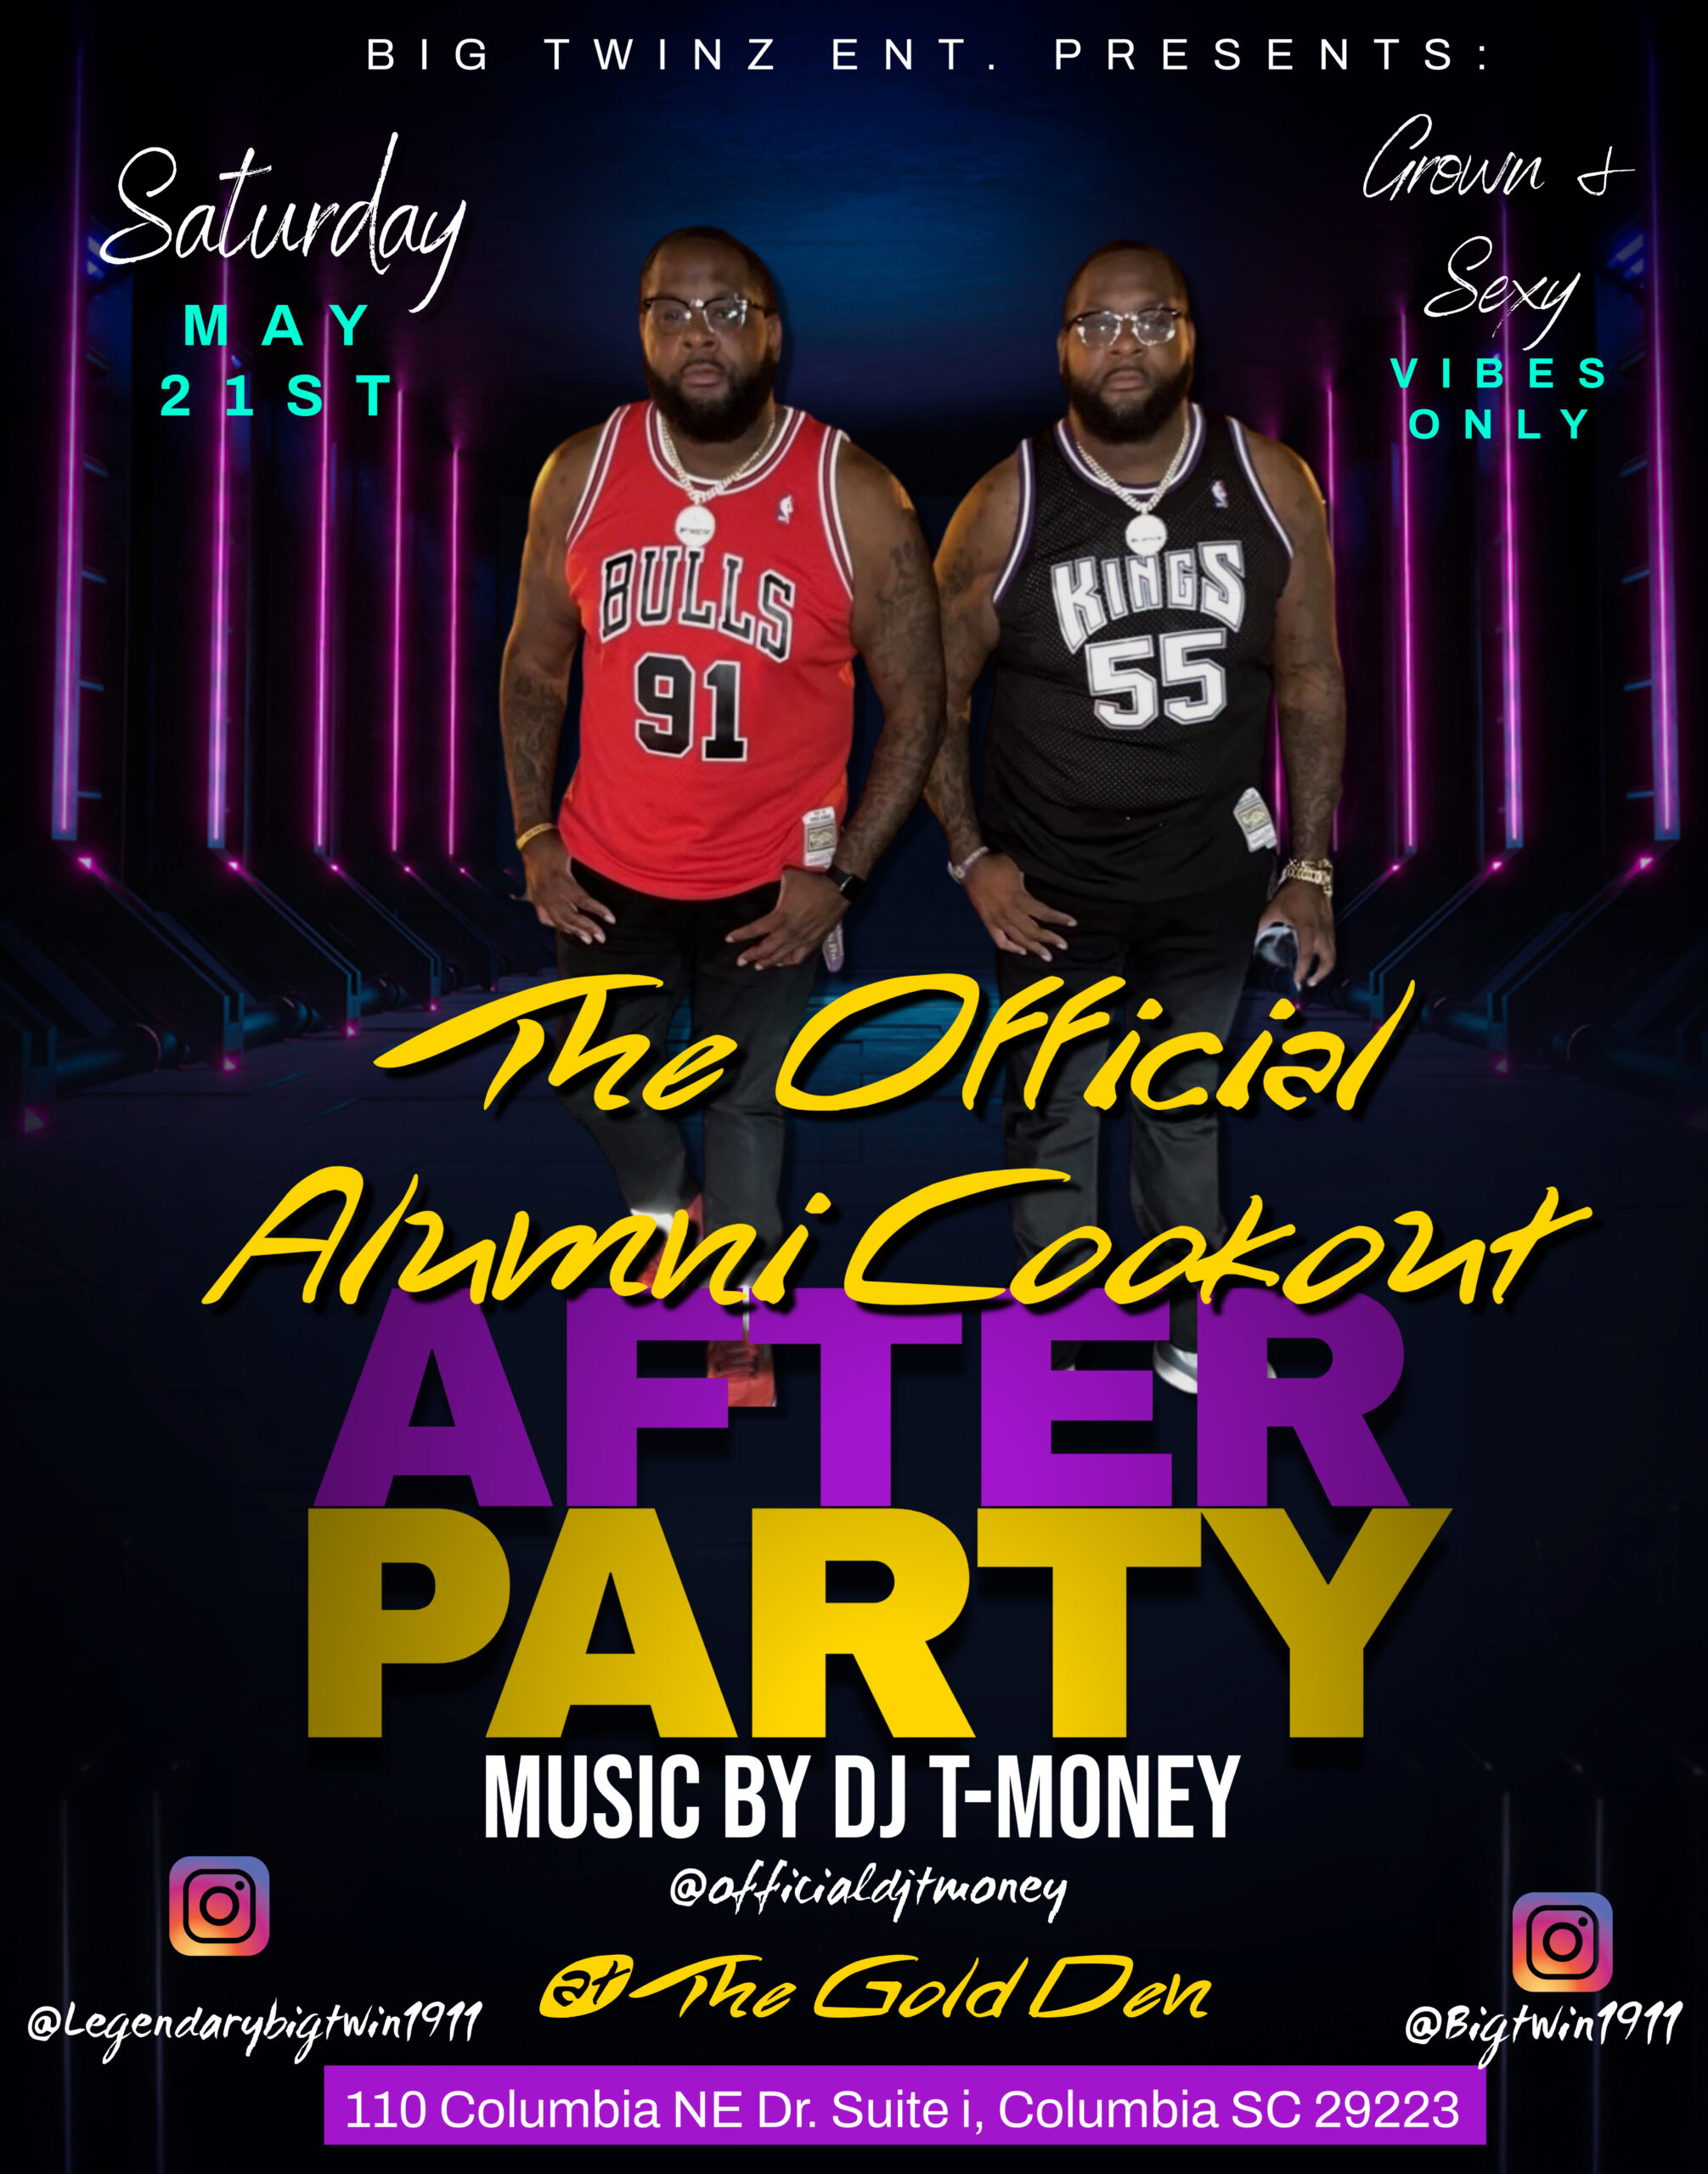 Copy of after work party flyer